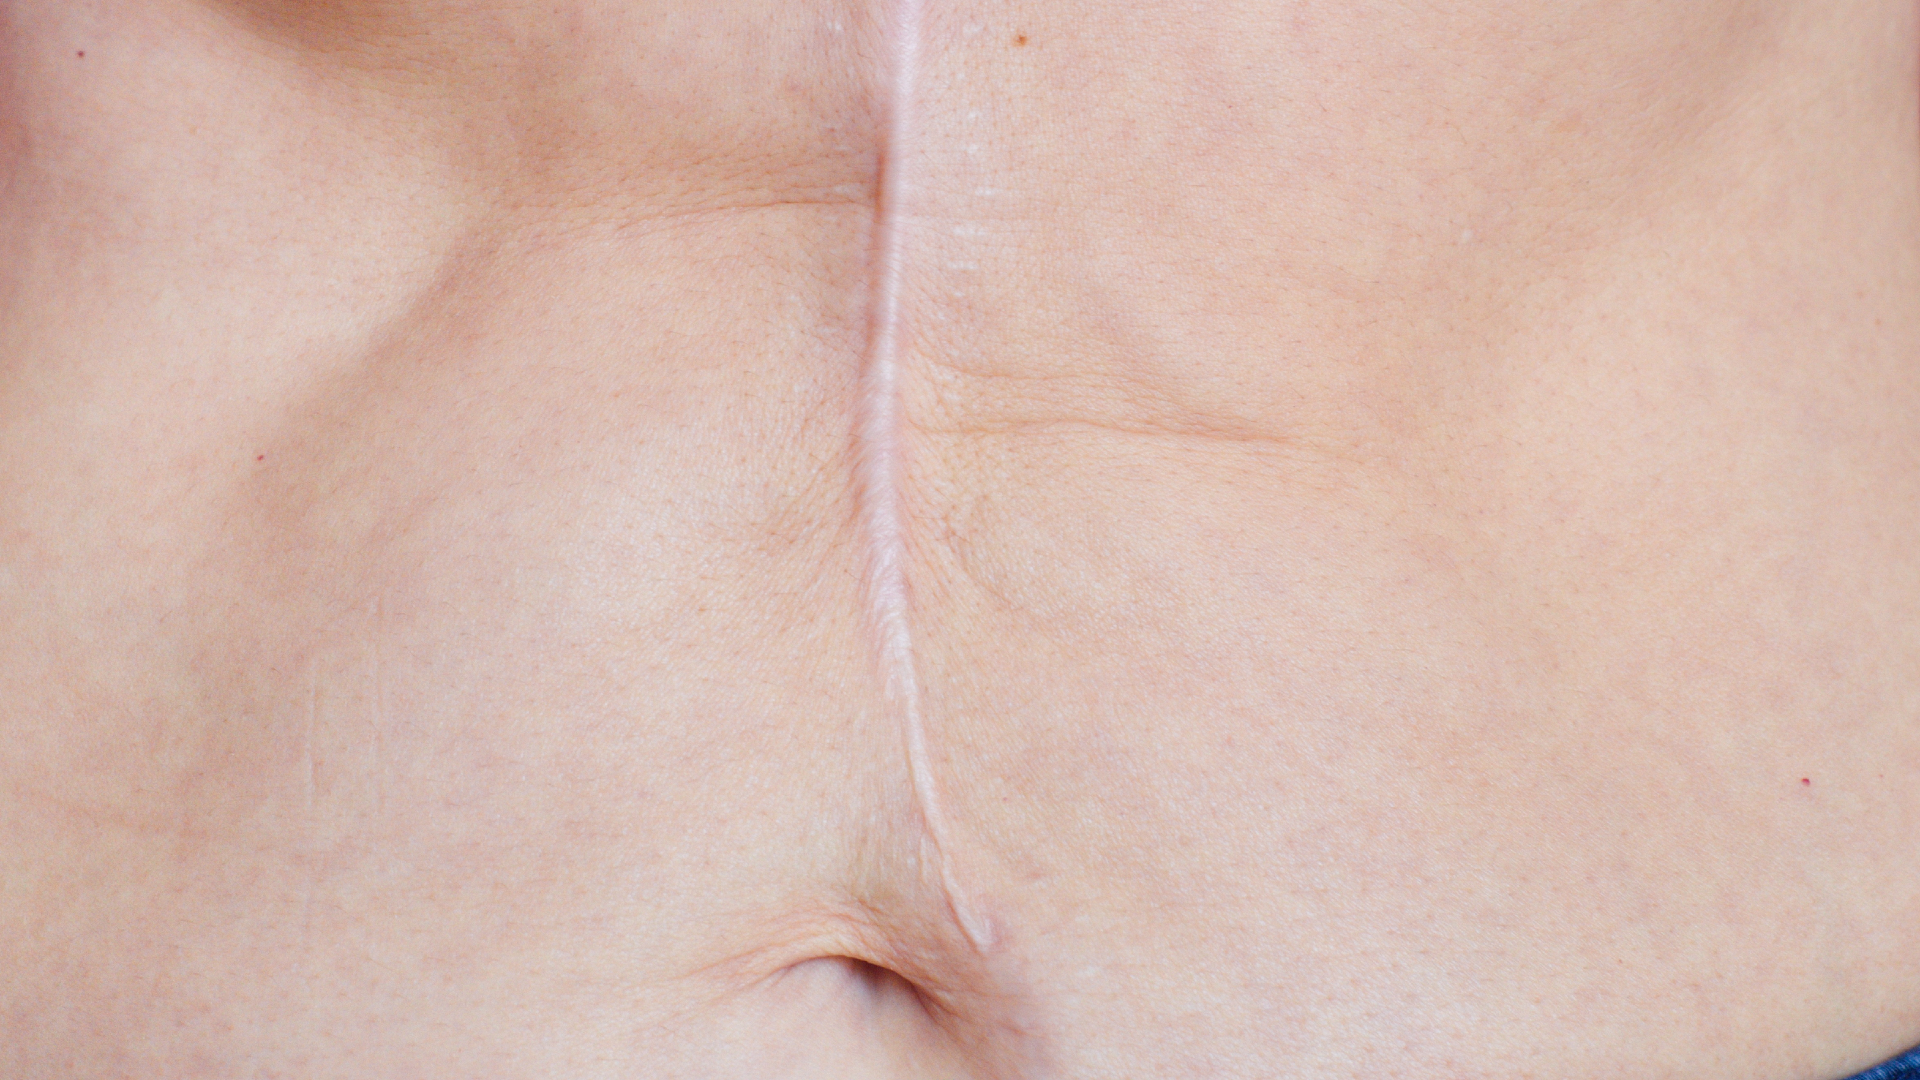 A person with a surgery scar above their naval